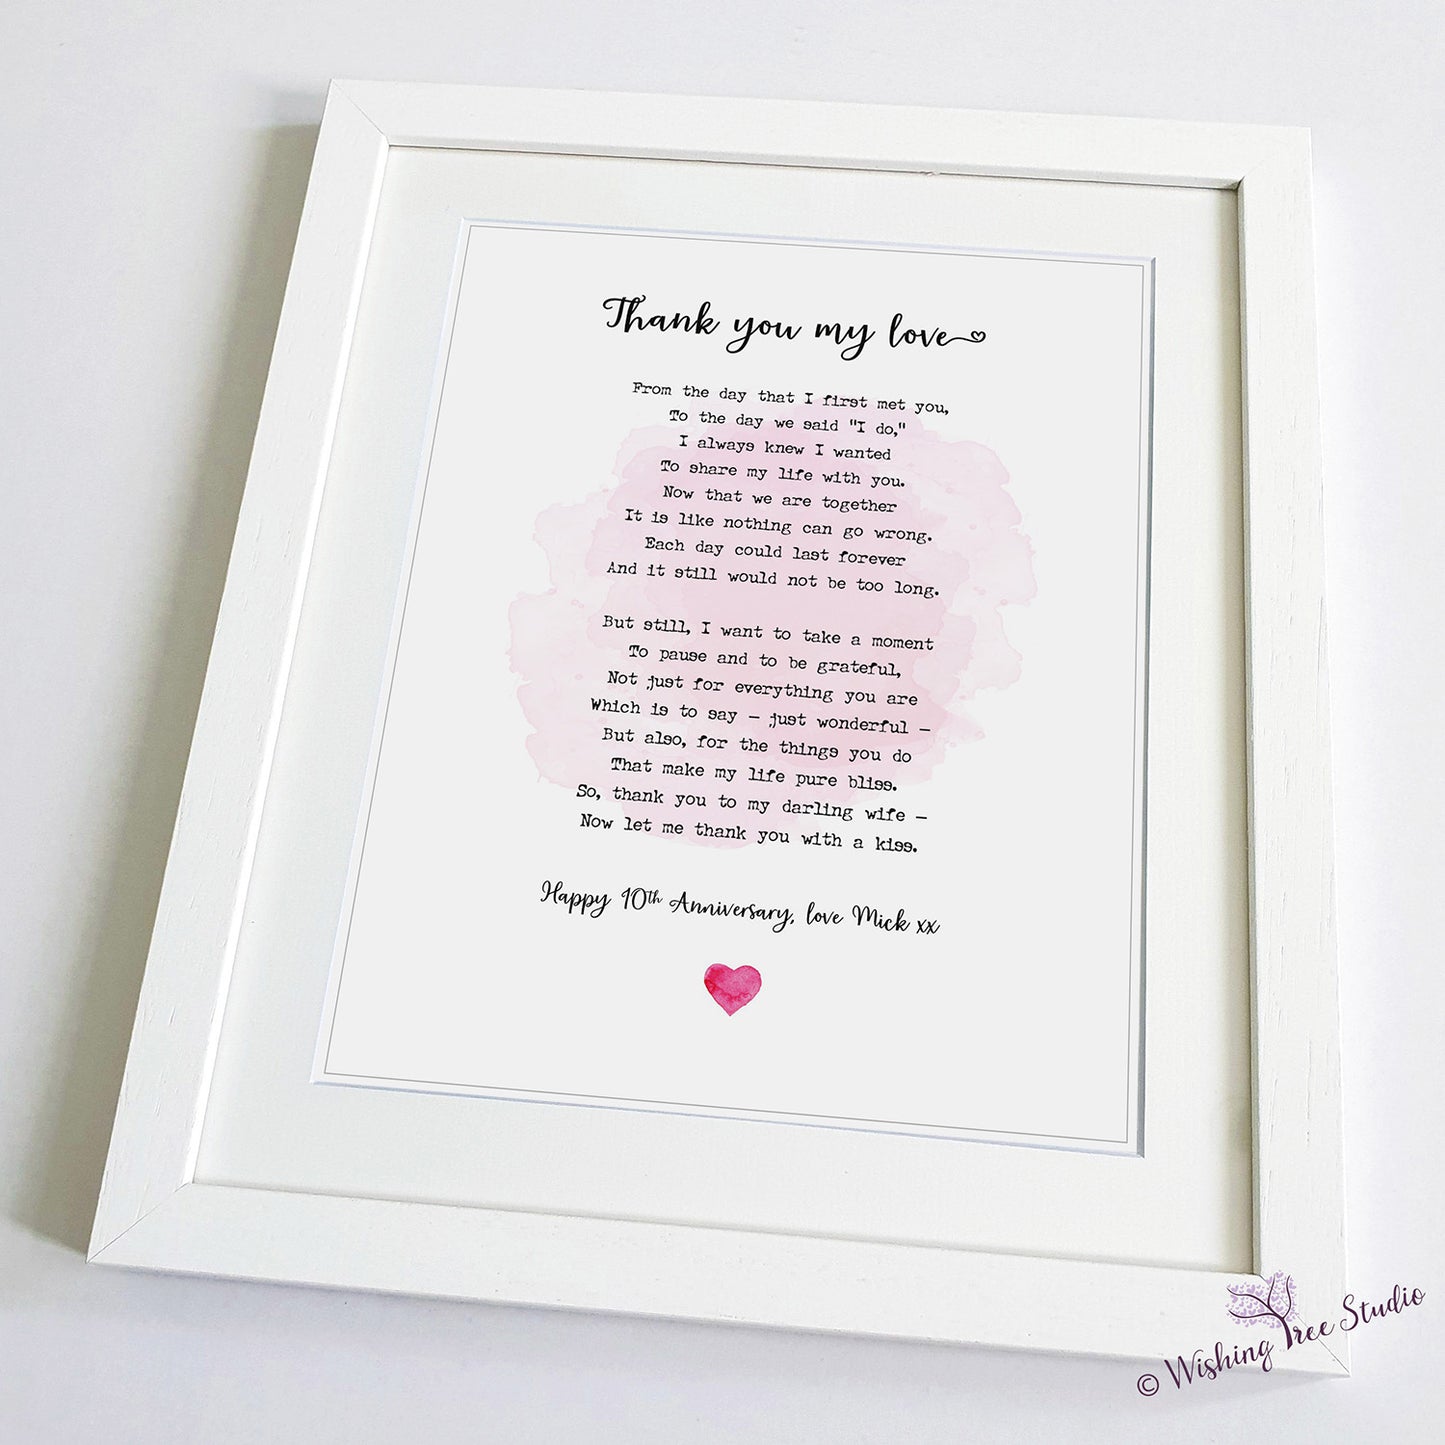 Simple framed poem thank you my love